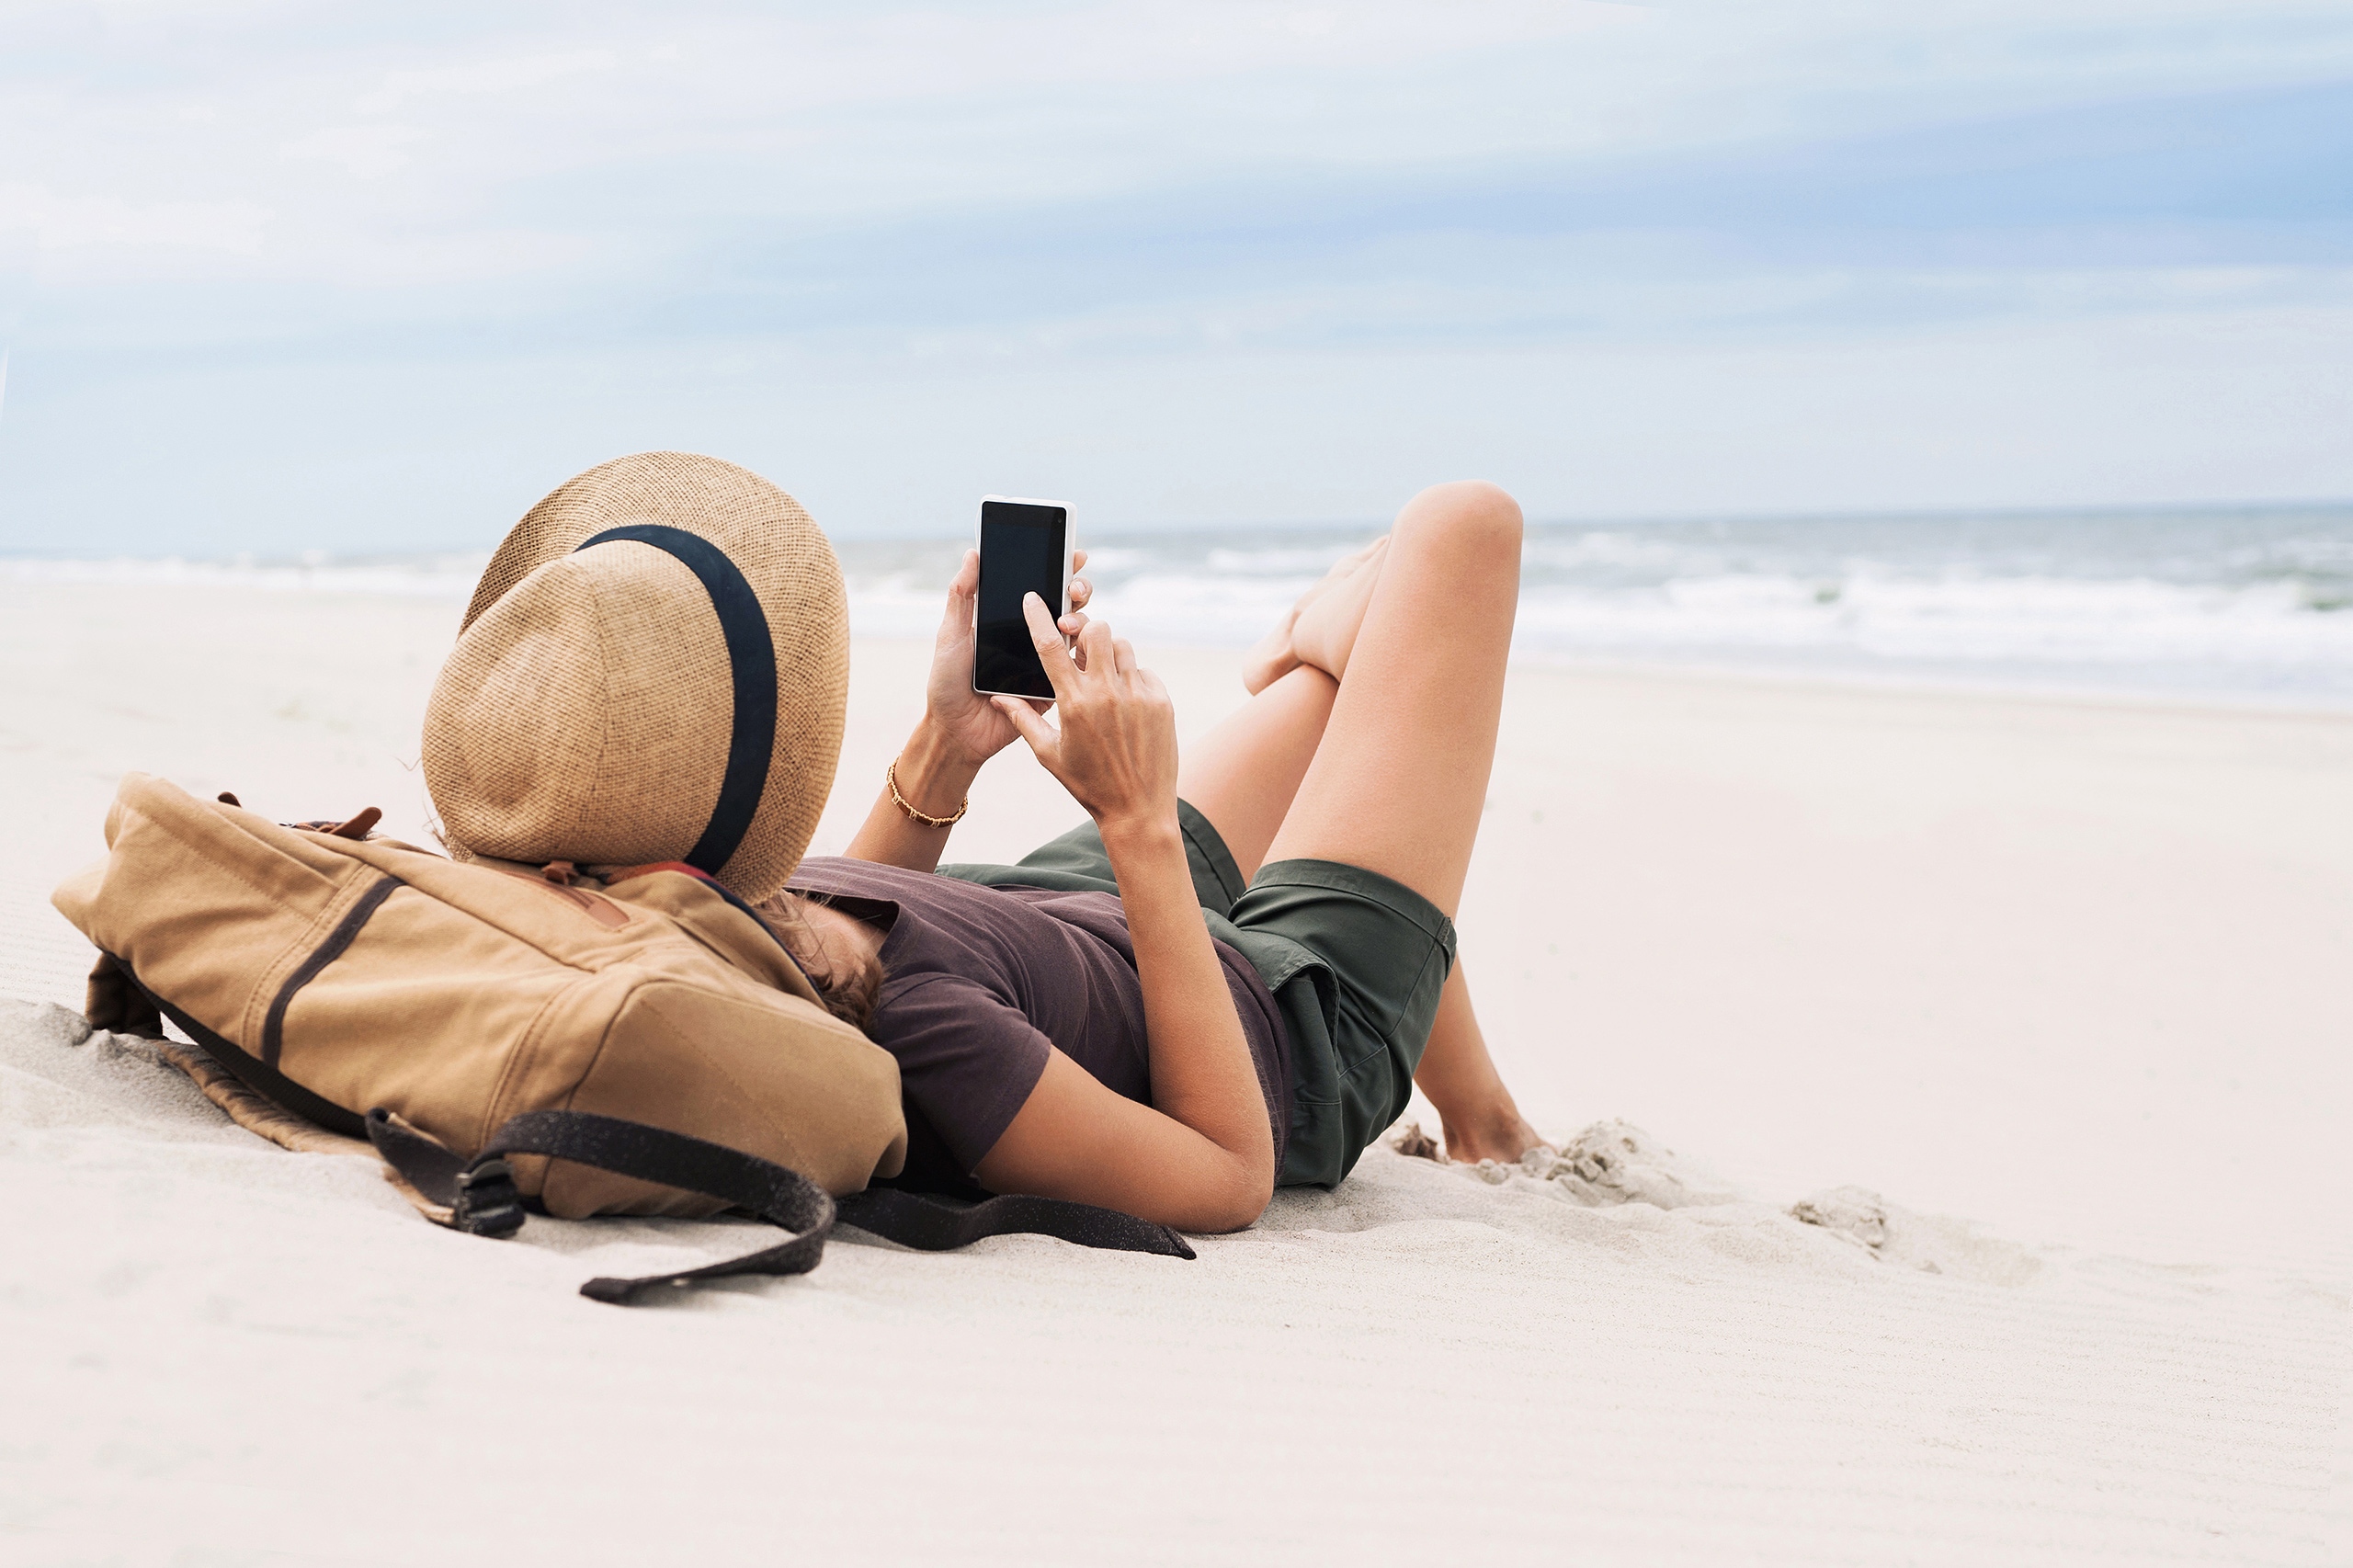 Image of a woman lying on a beach and looking at her phone